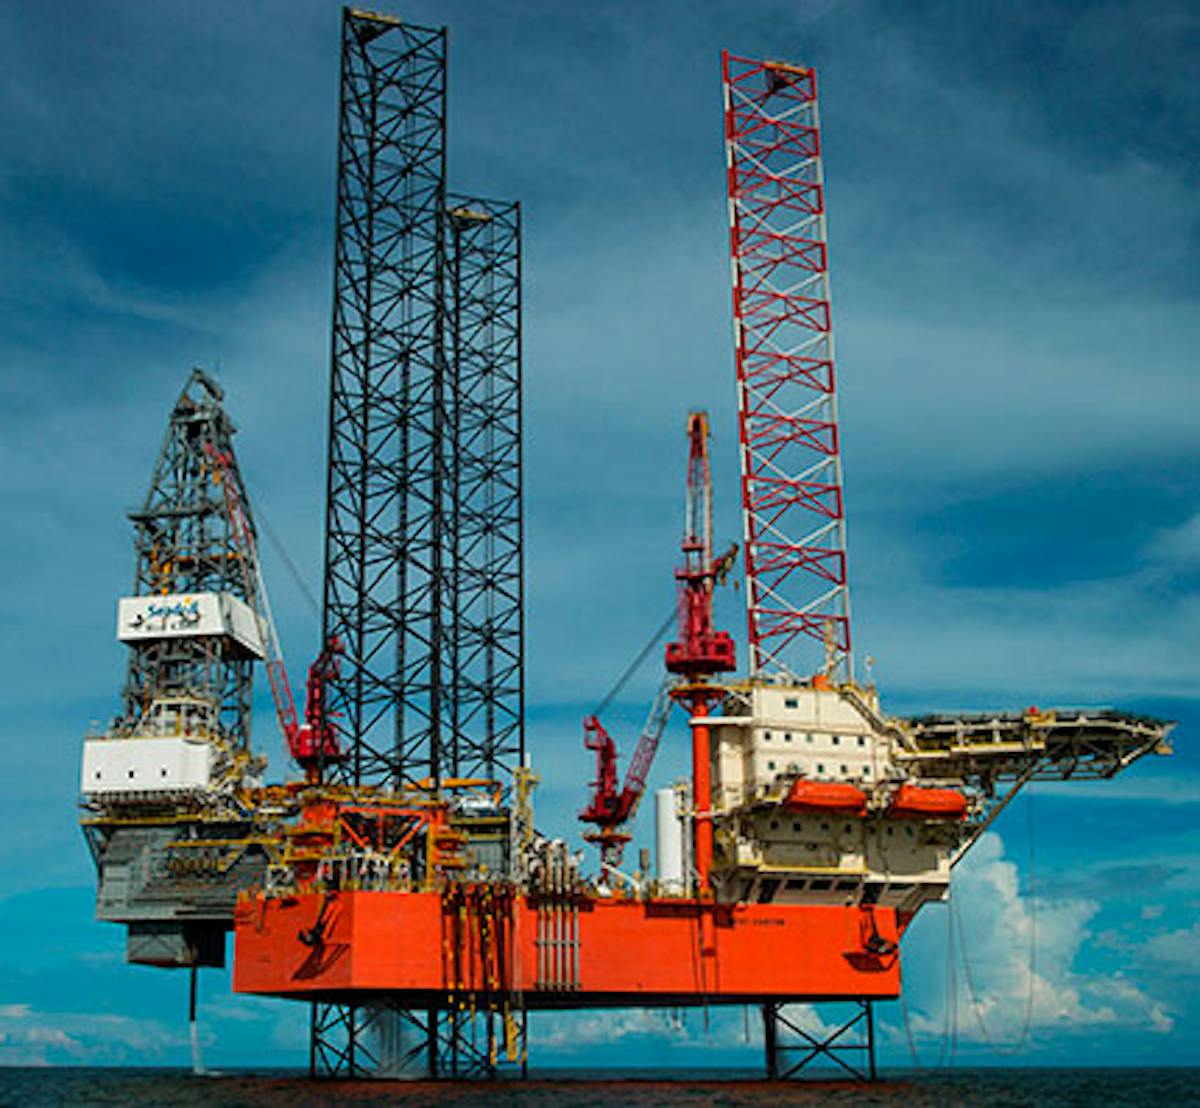 GulfDrill will initially bareboat charter the West Castor from Seadrill.